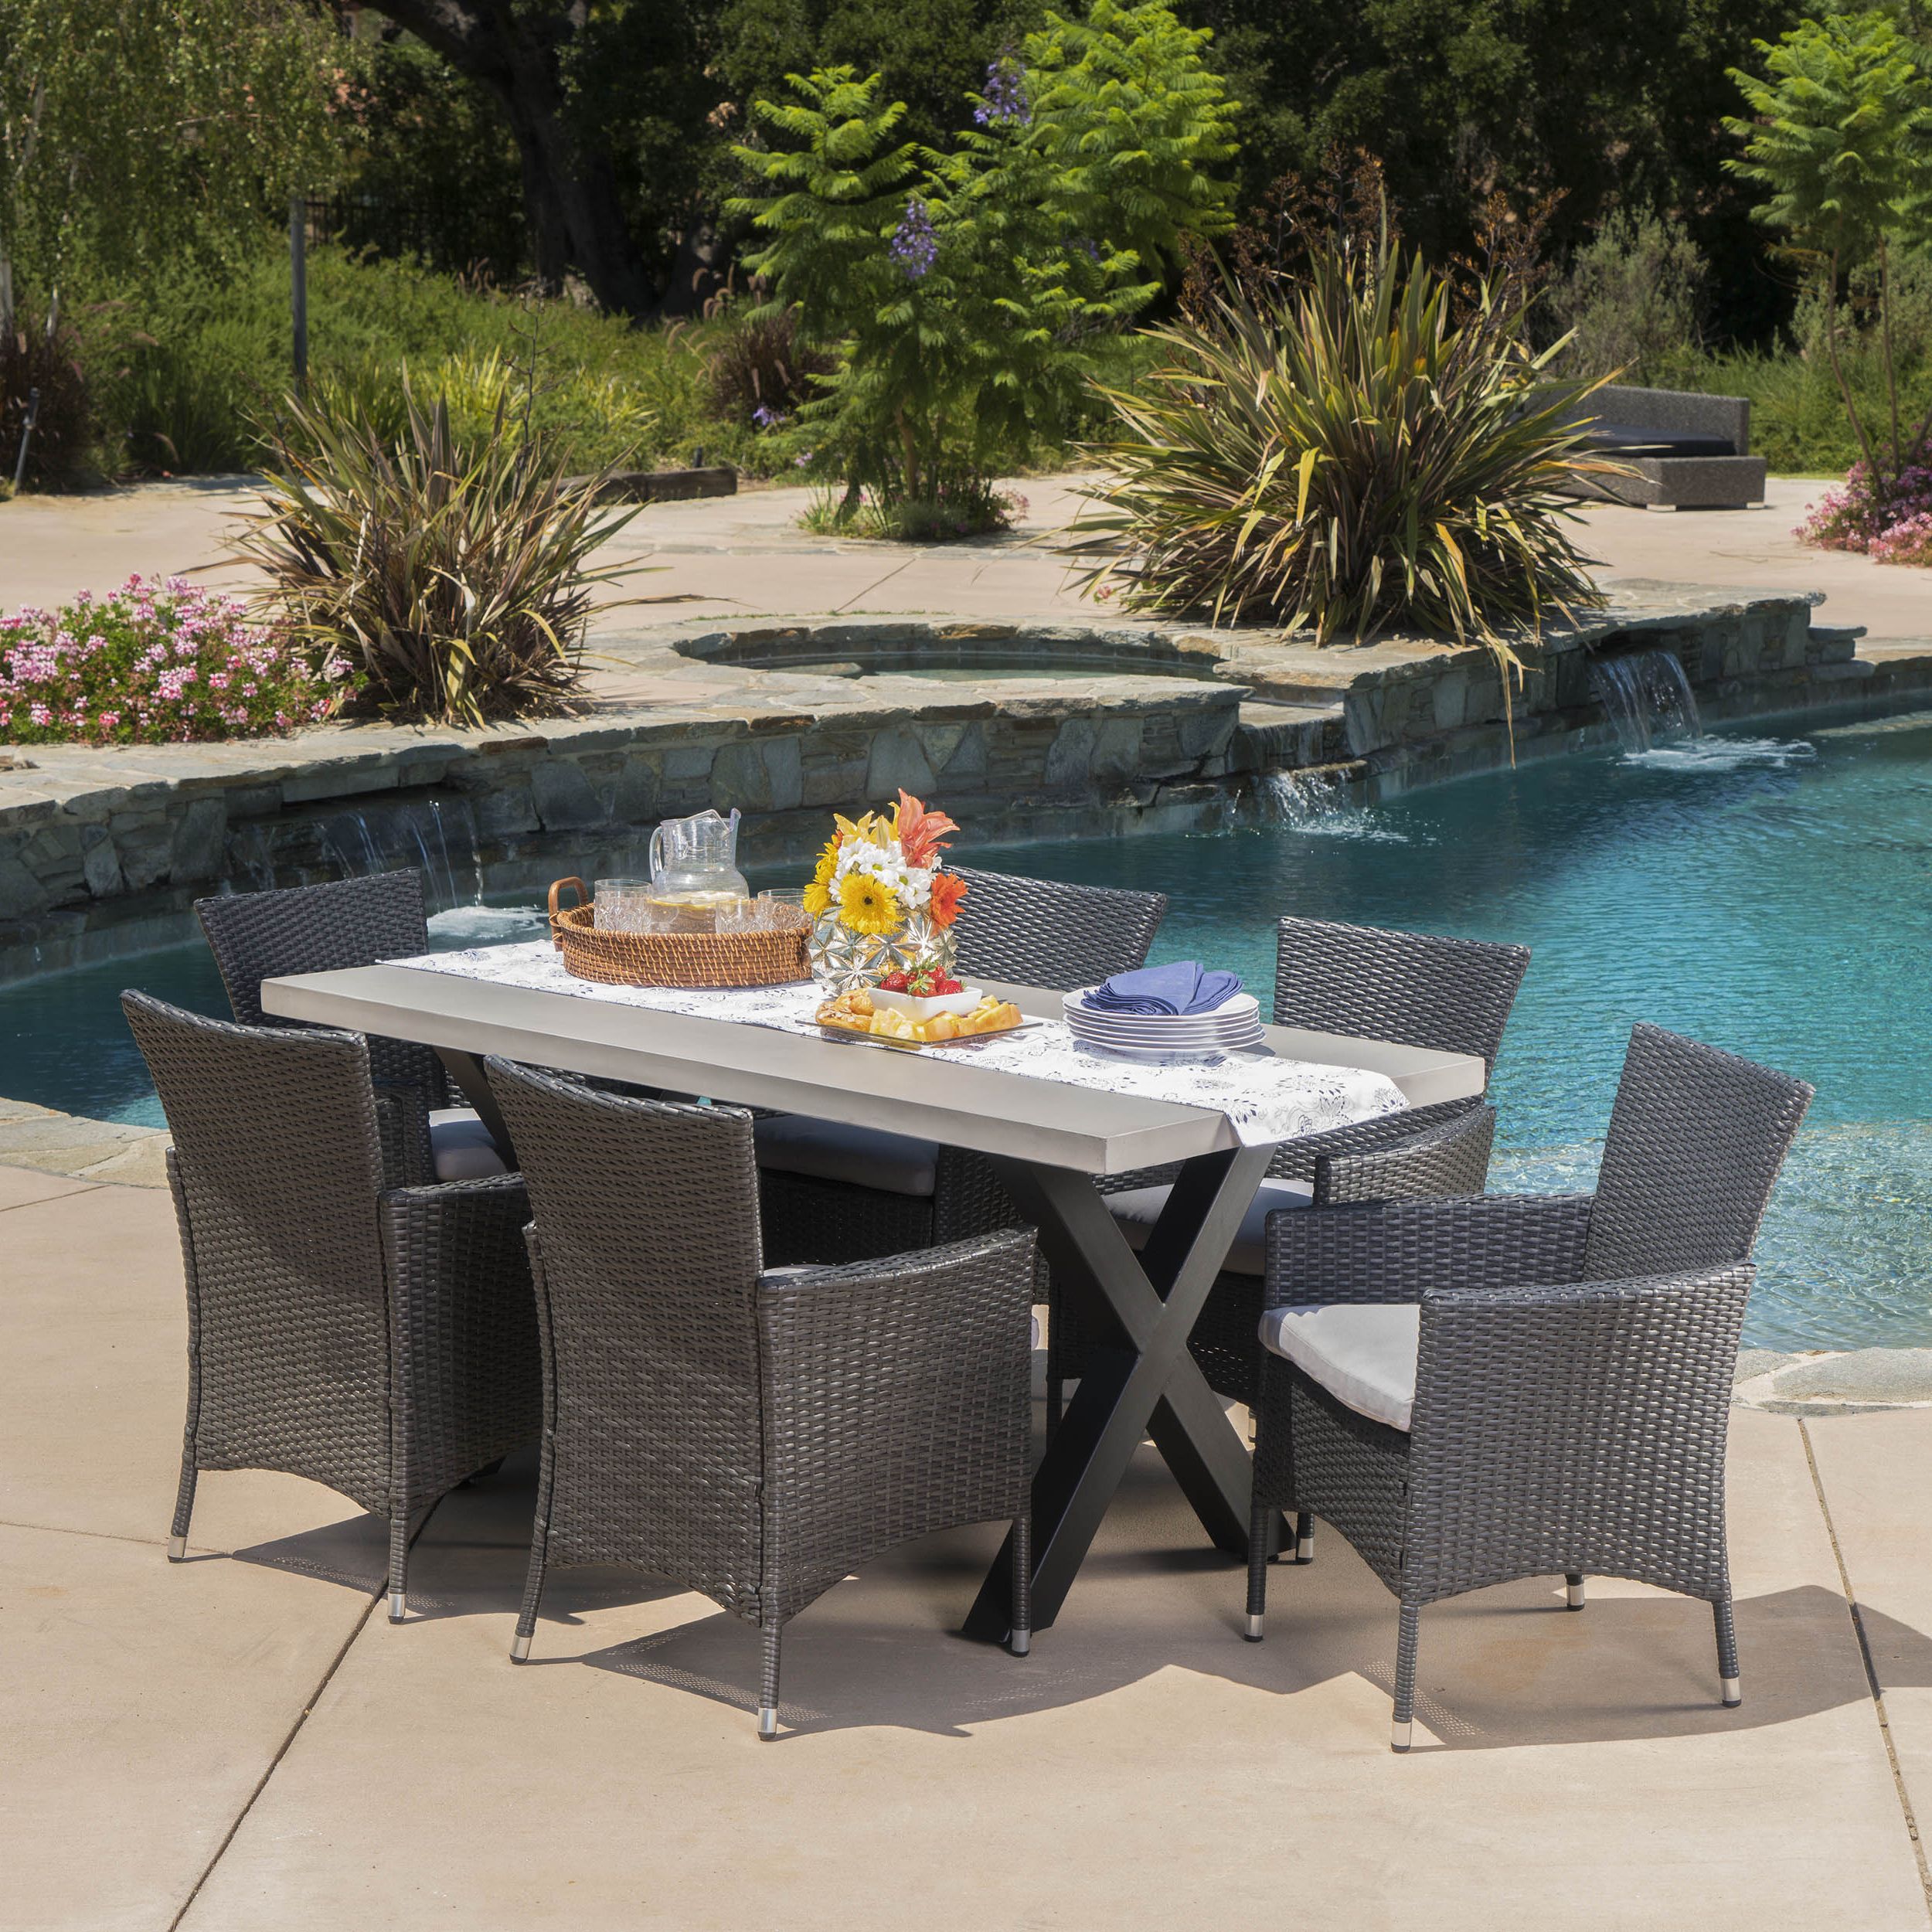 Most Recently Released Rectangular 7 Piece Patio Dining Sets Intended For Shiloh Outdoor 7 Piece Dining Set With Concrete Rectangular Table And (View 5 of 15)